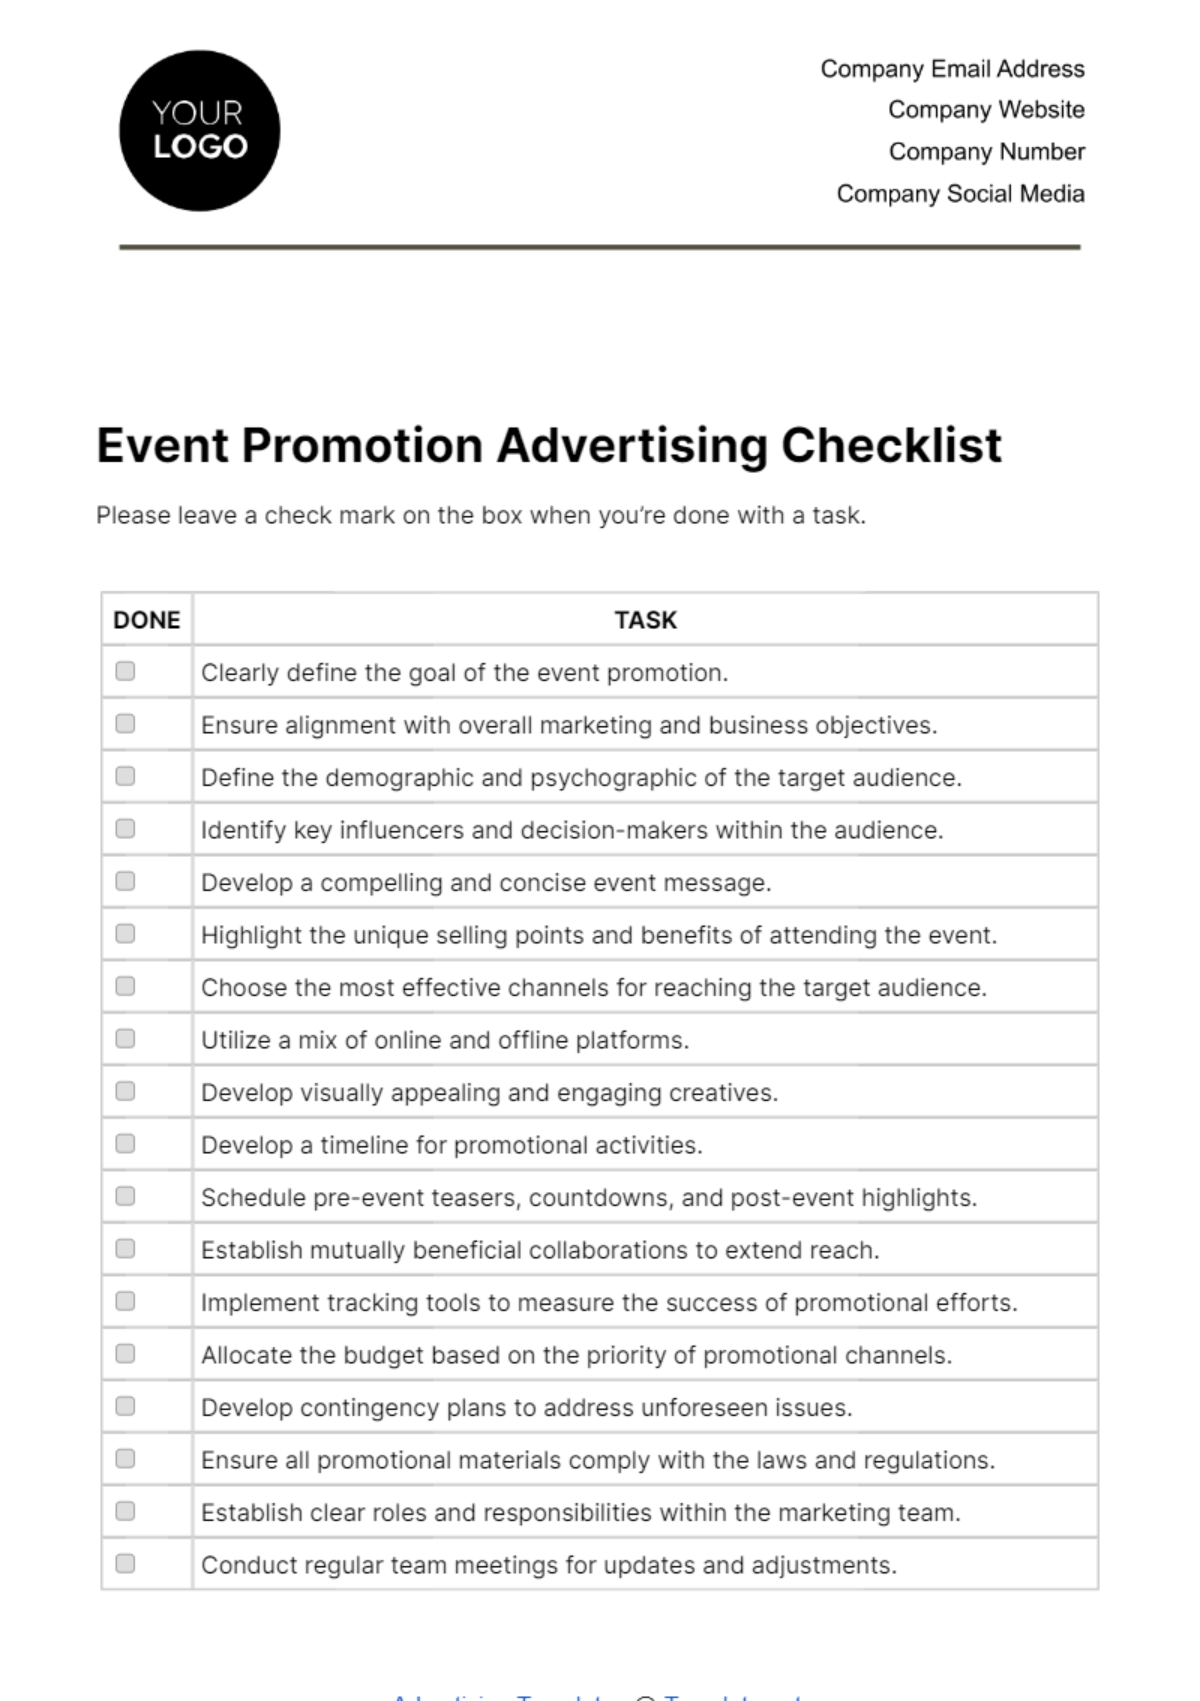 Free Event Promotion Advertising Checklist Template